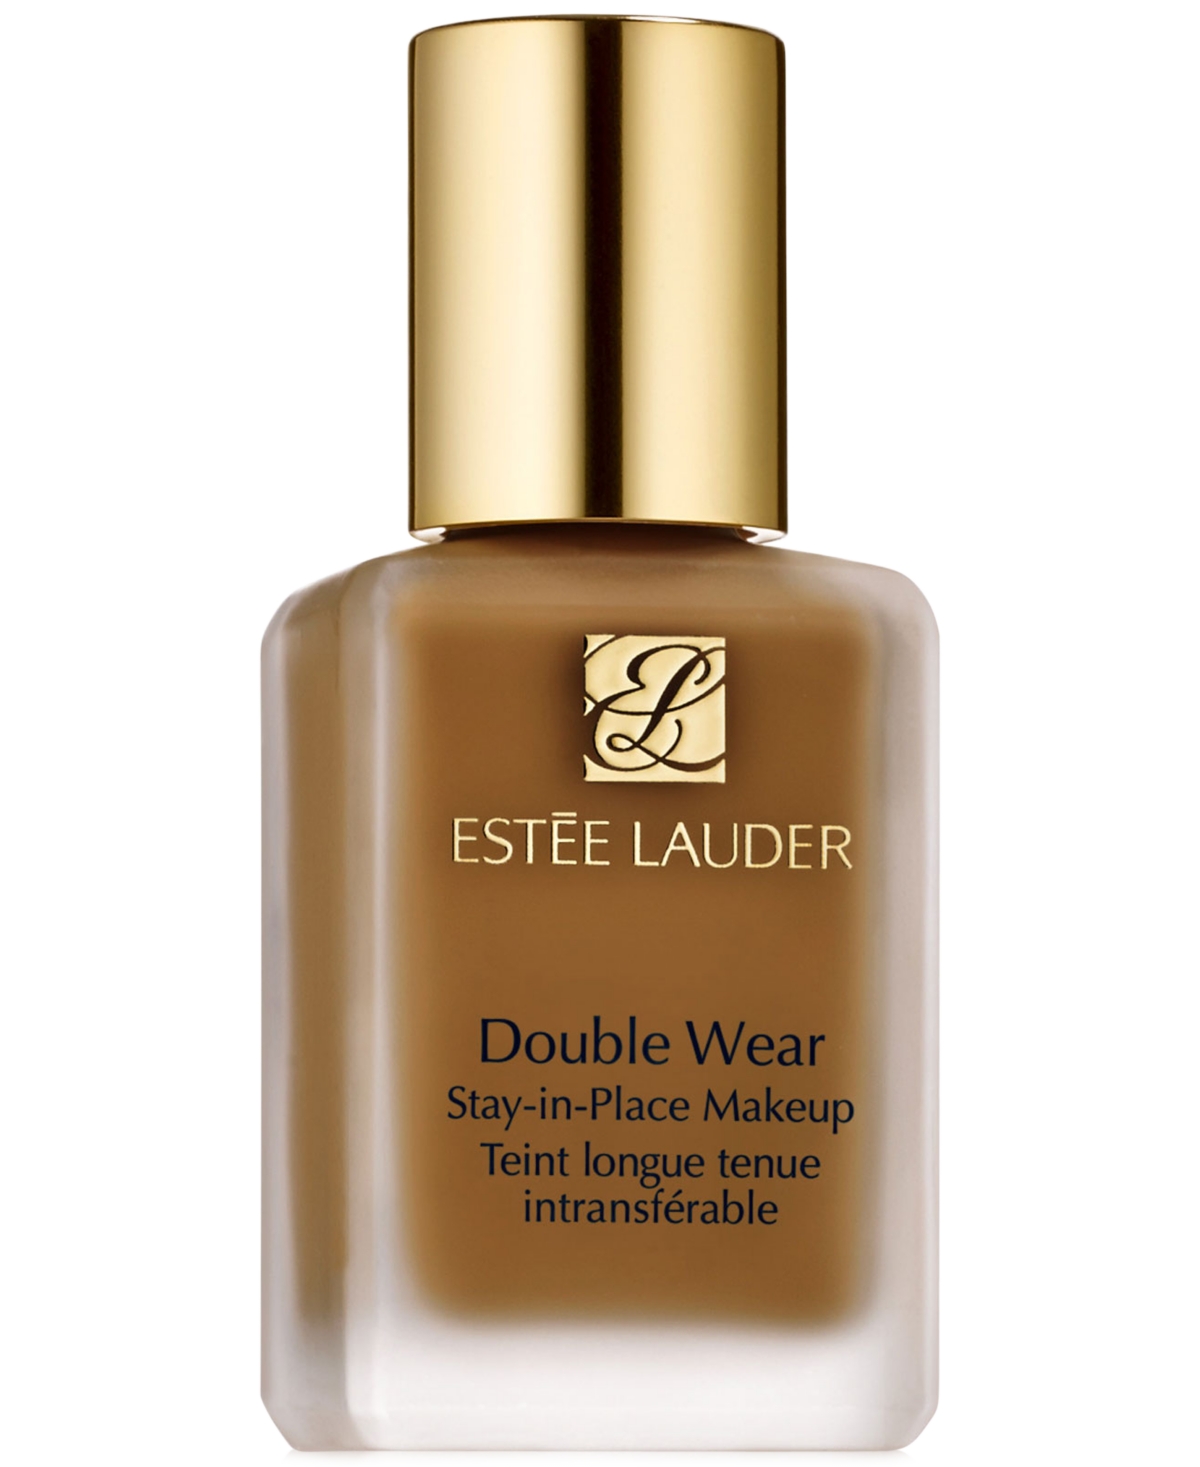 Estée Lauder Double Wear Stay-in-place Makeup, 1 Oz. In N Truffle Very Deep With Neutral,subtle